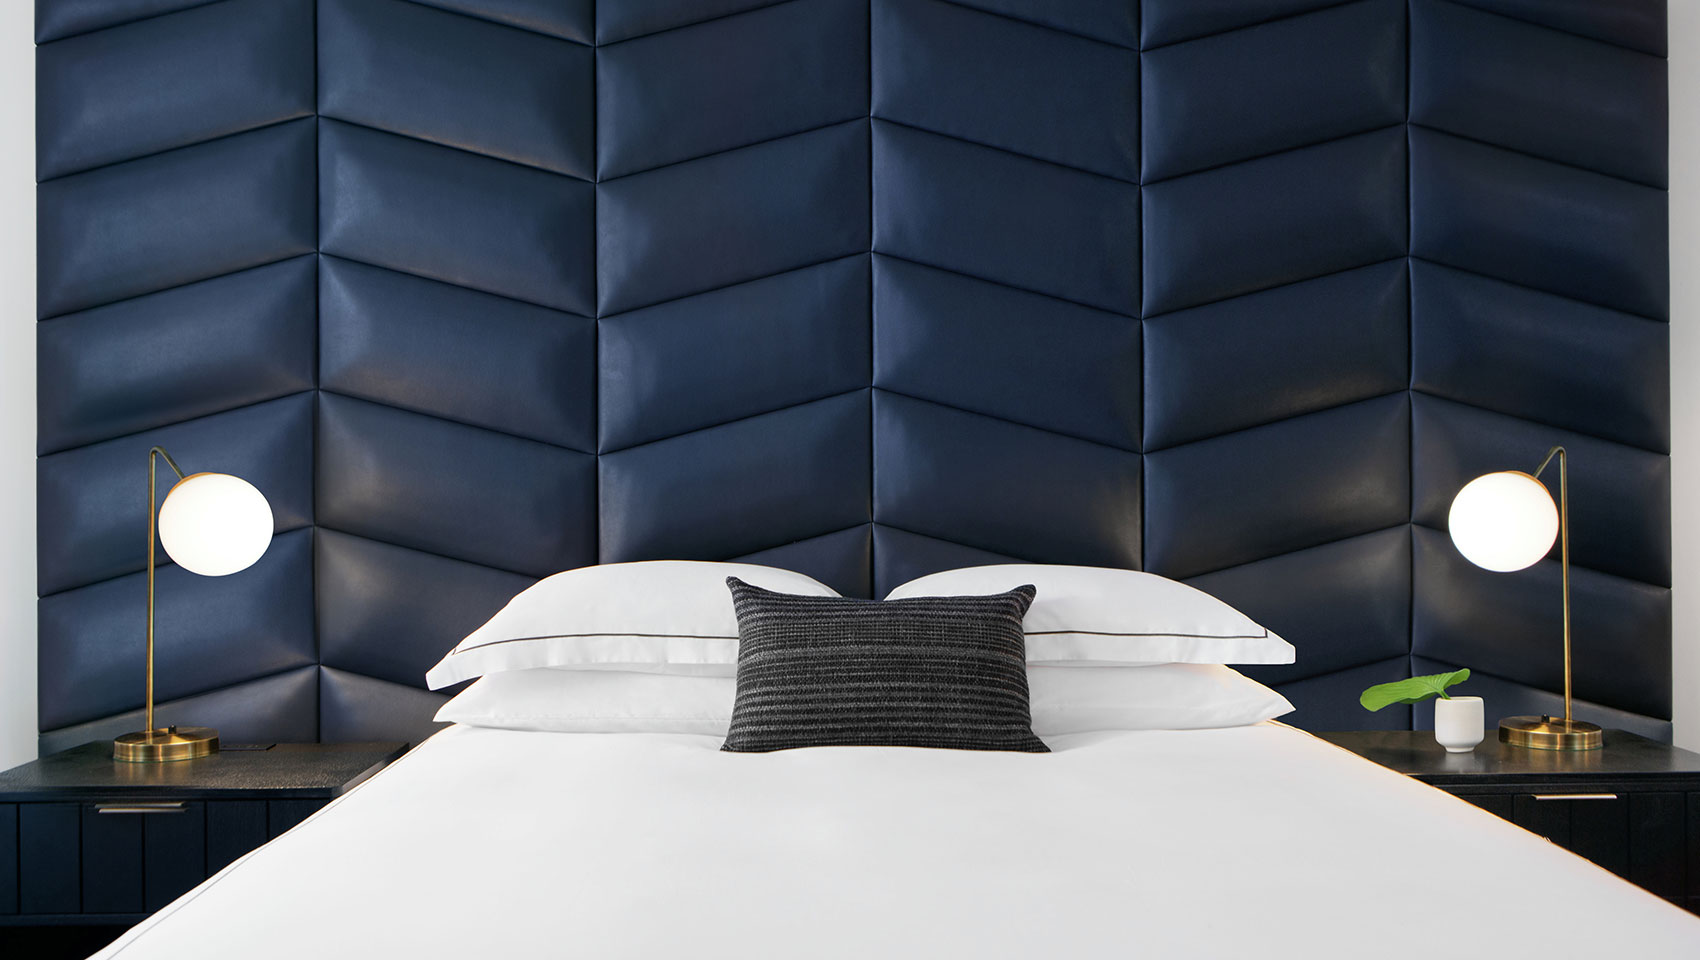 Kimpton Shane king guest bed room with blue headboard